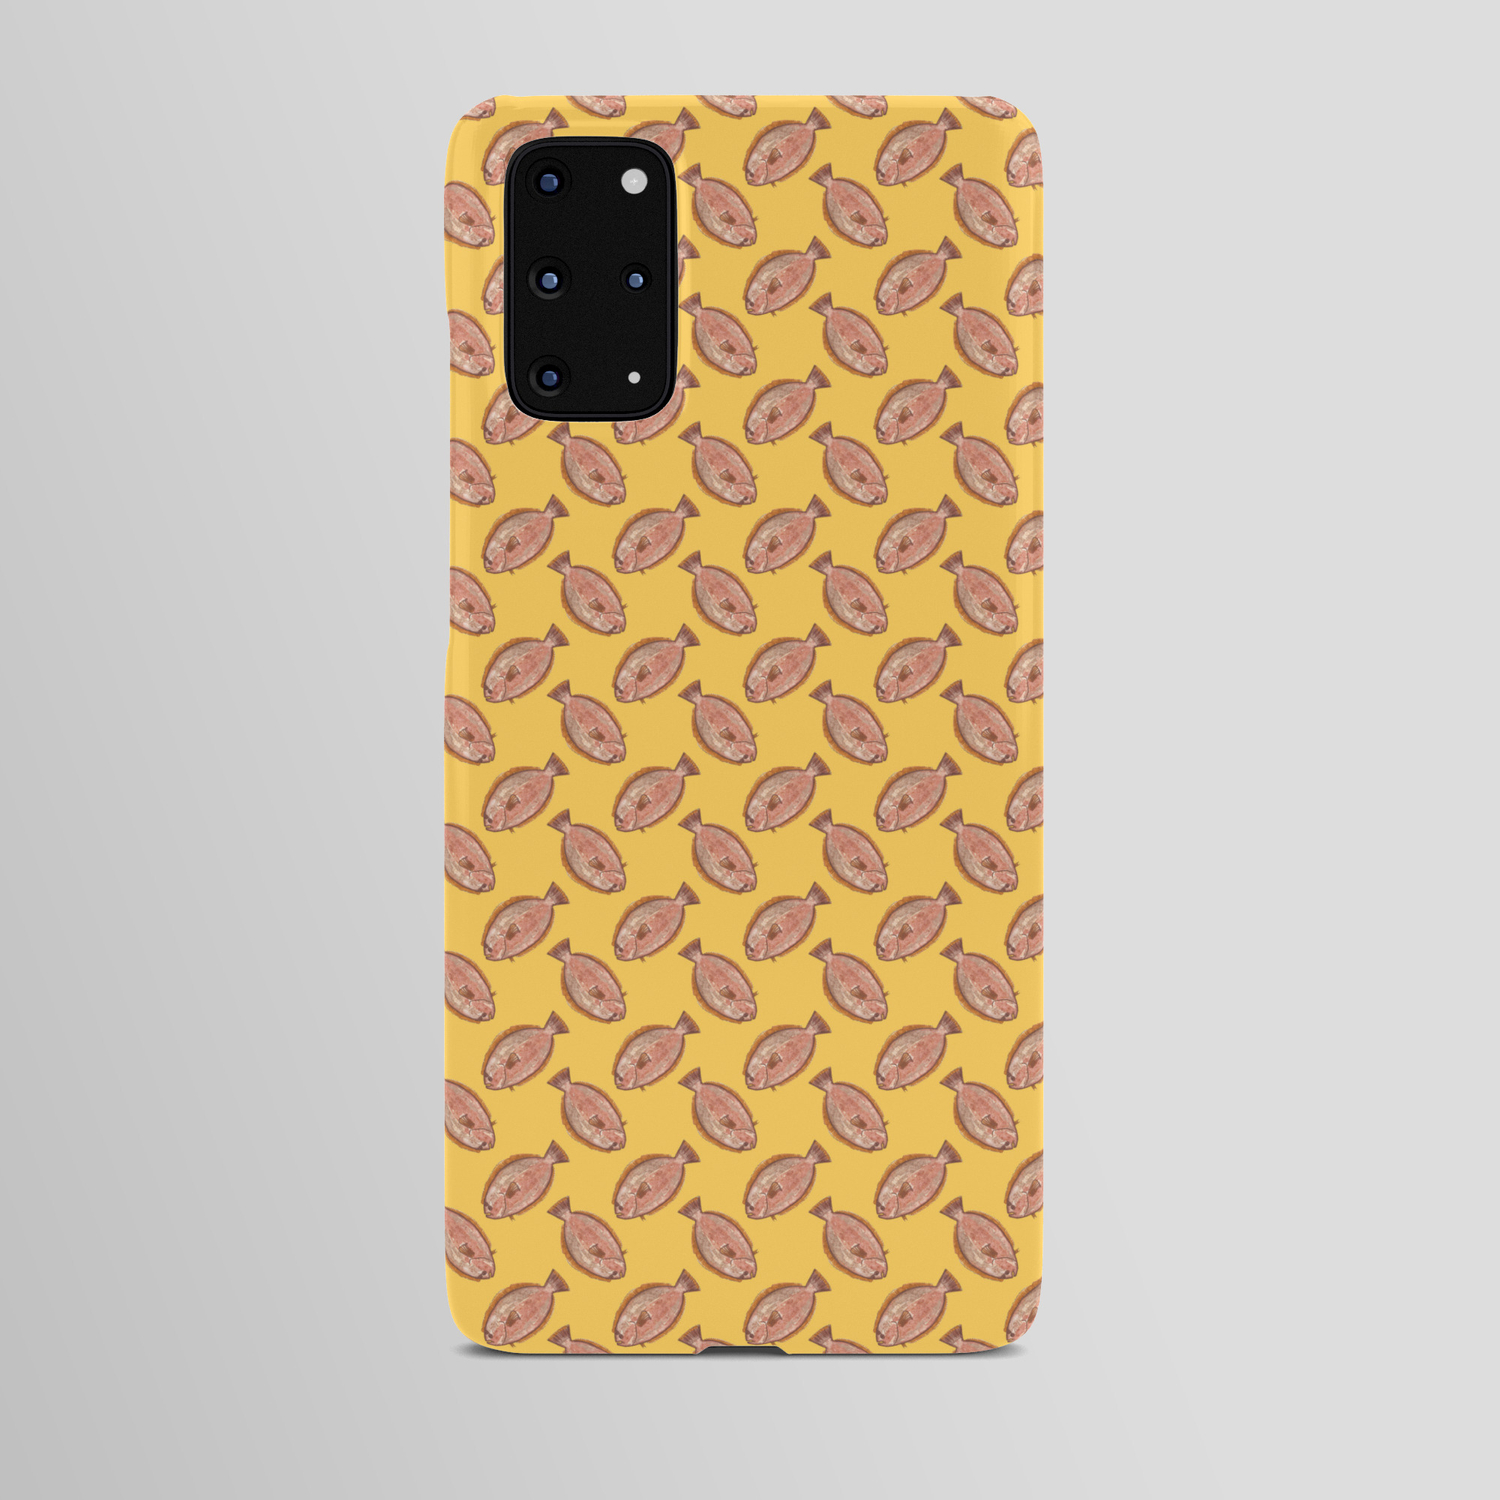 Flounder Starts with F Ocean Animals Alphabet Android Case by Erin Belkin |  Society6